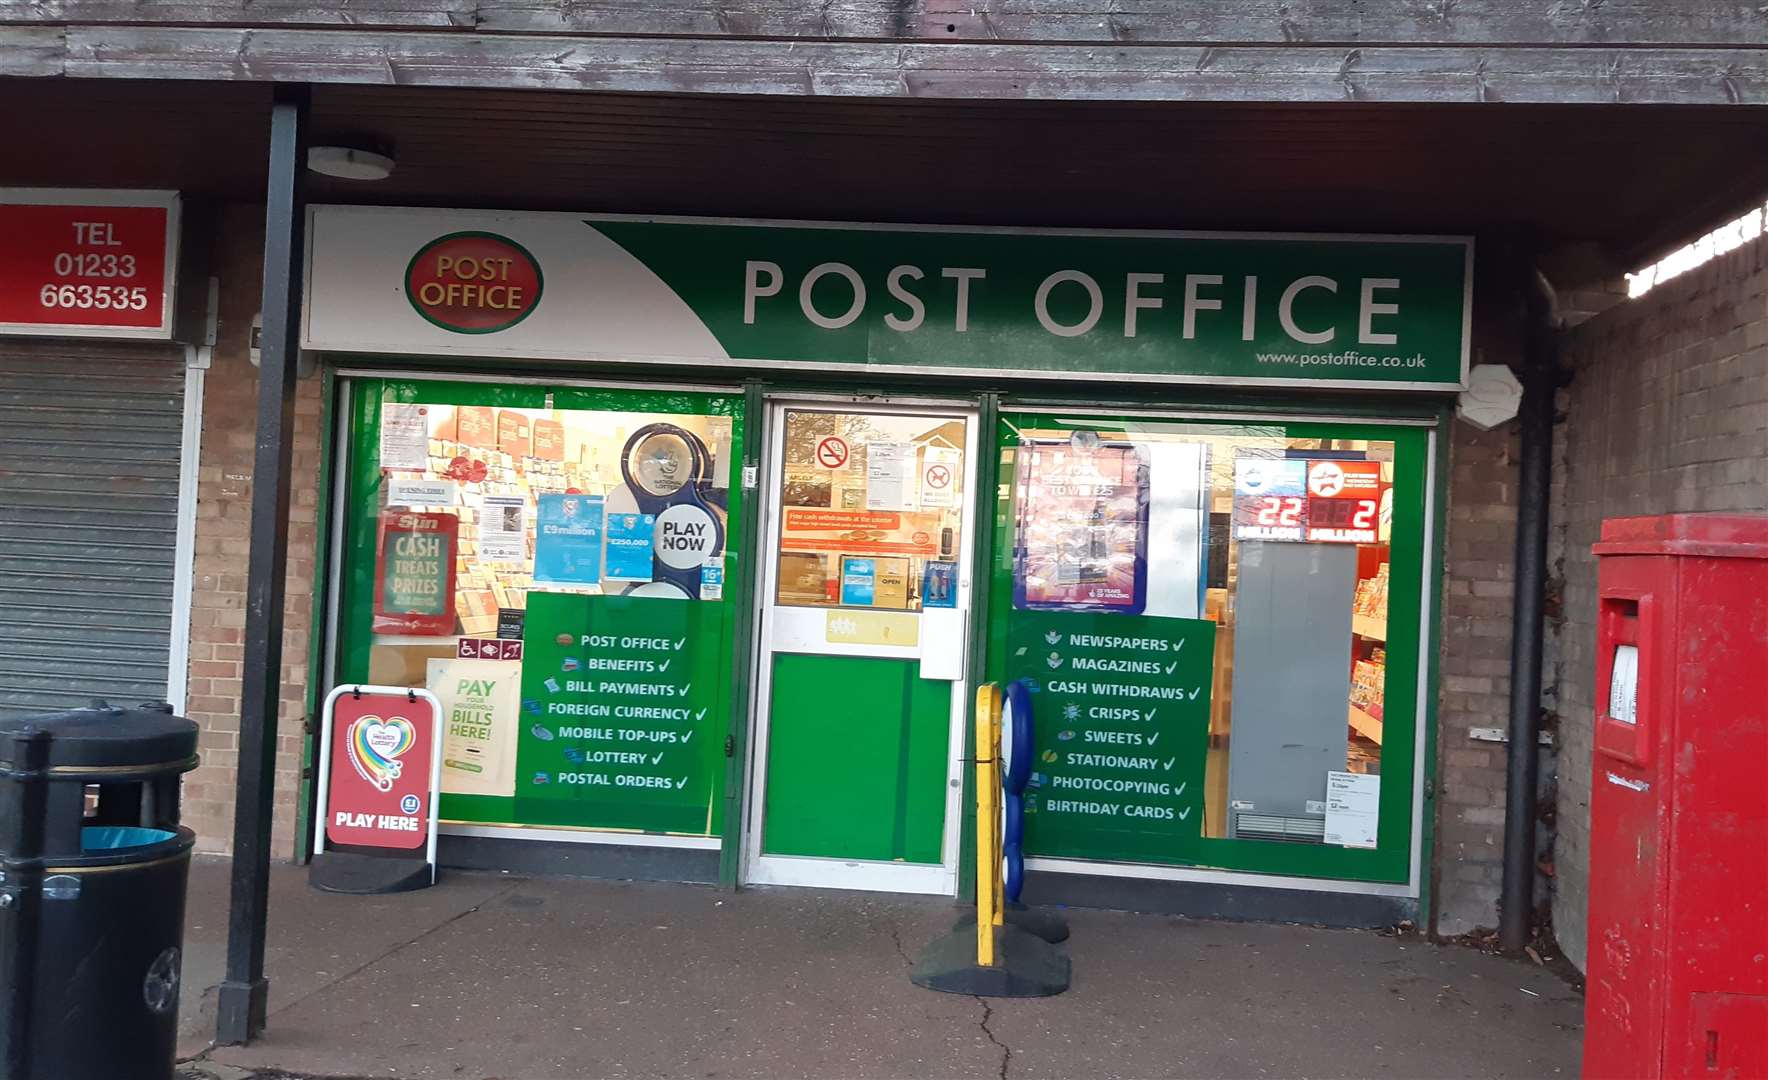 Bockhanger Post Office was open for 16 years